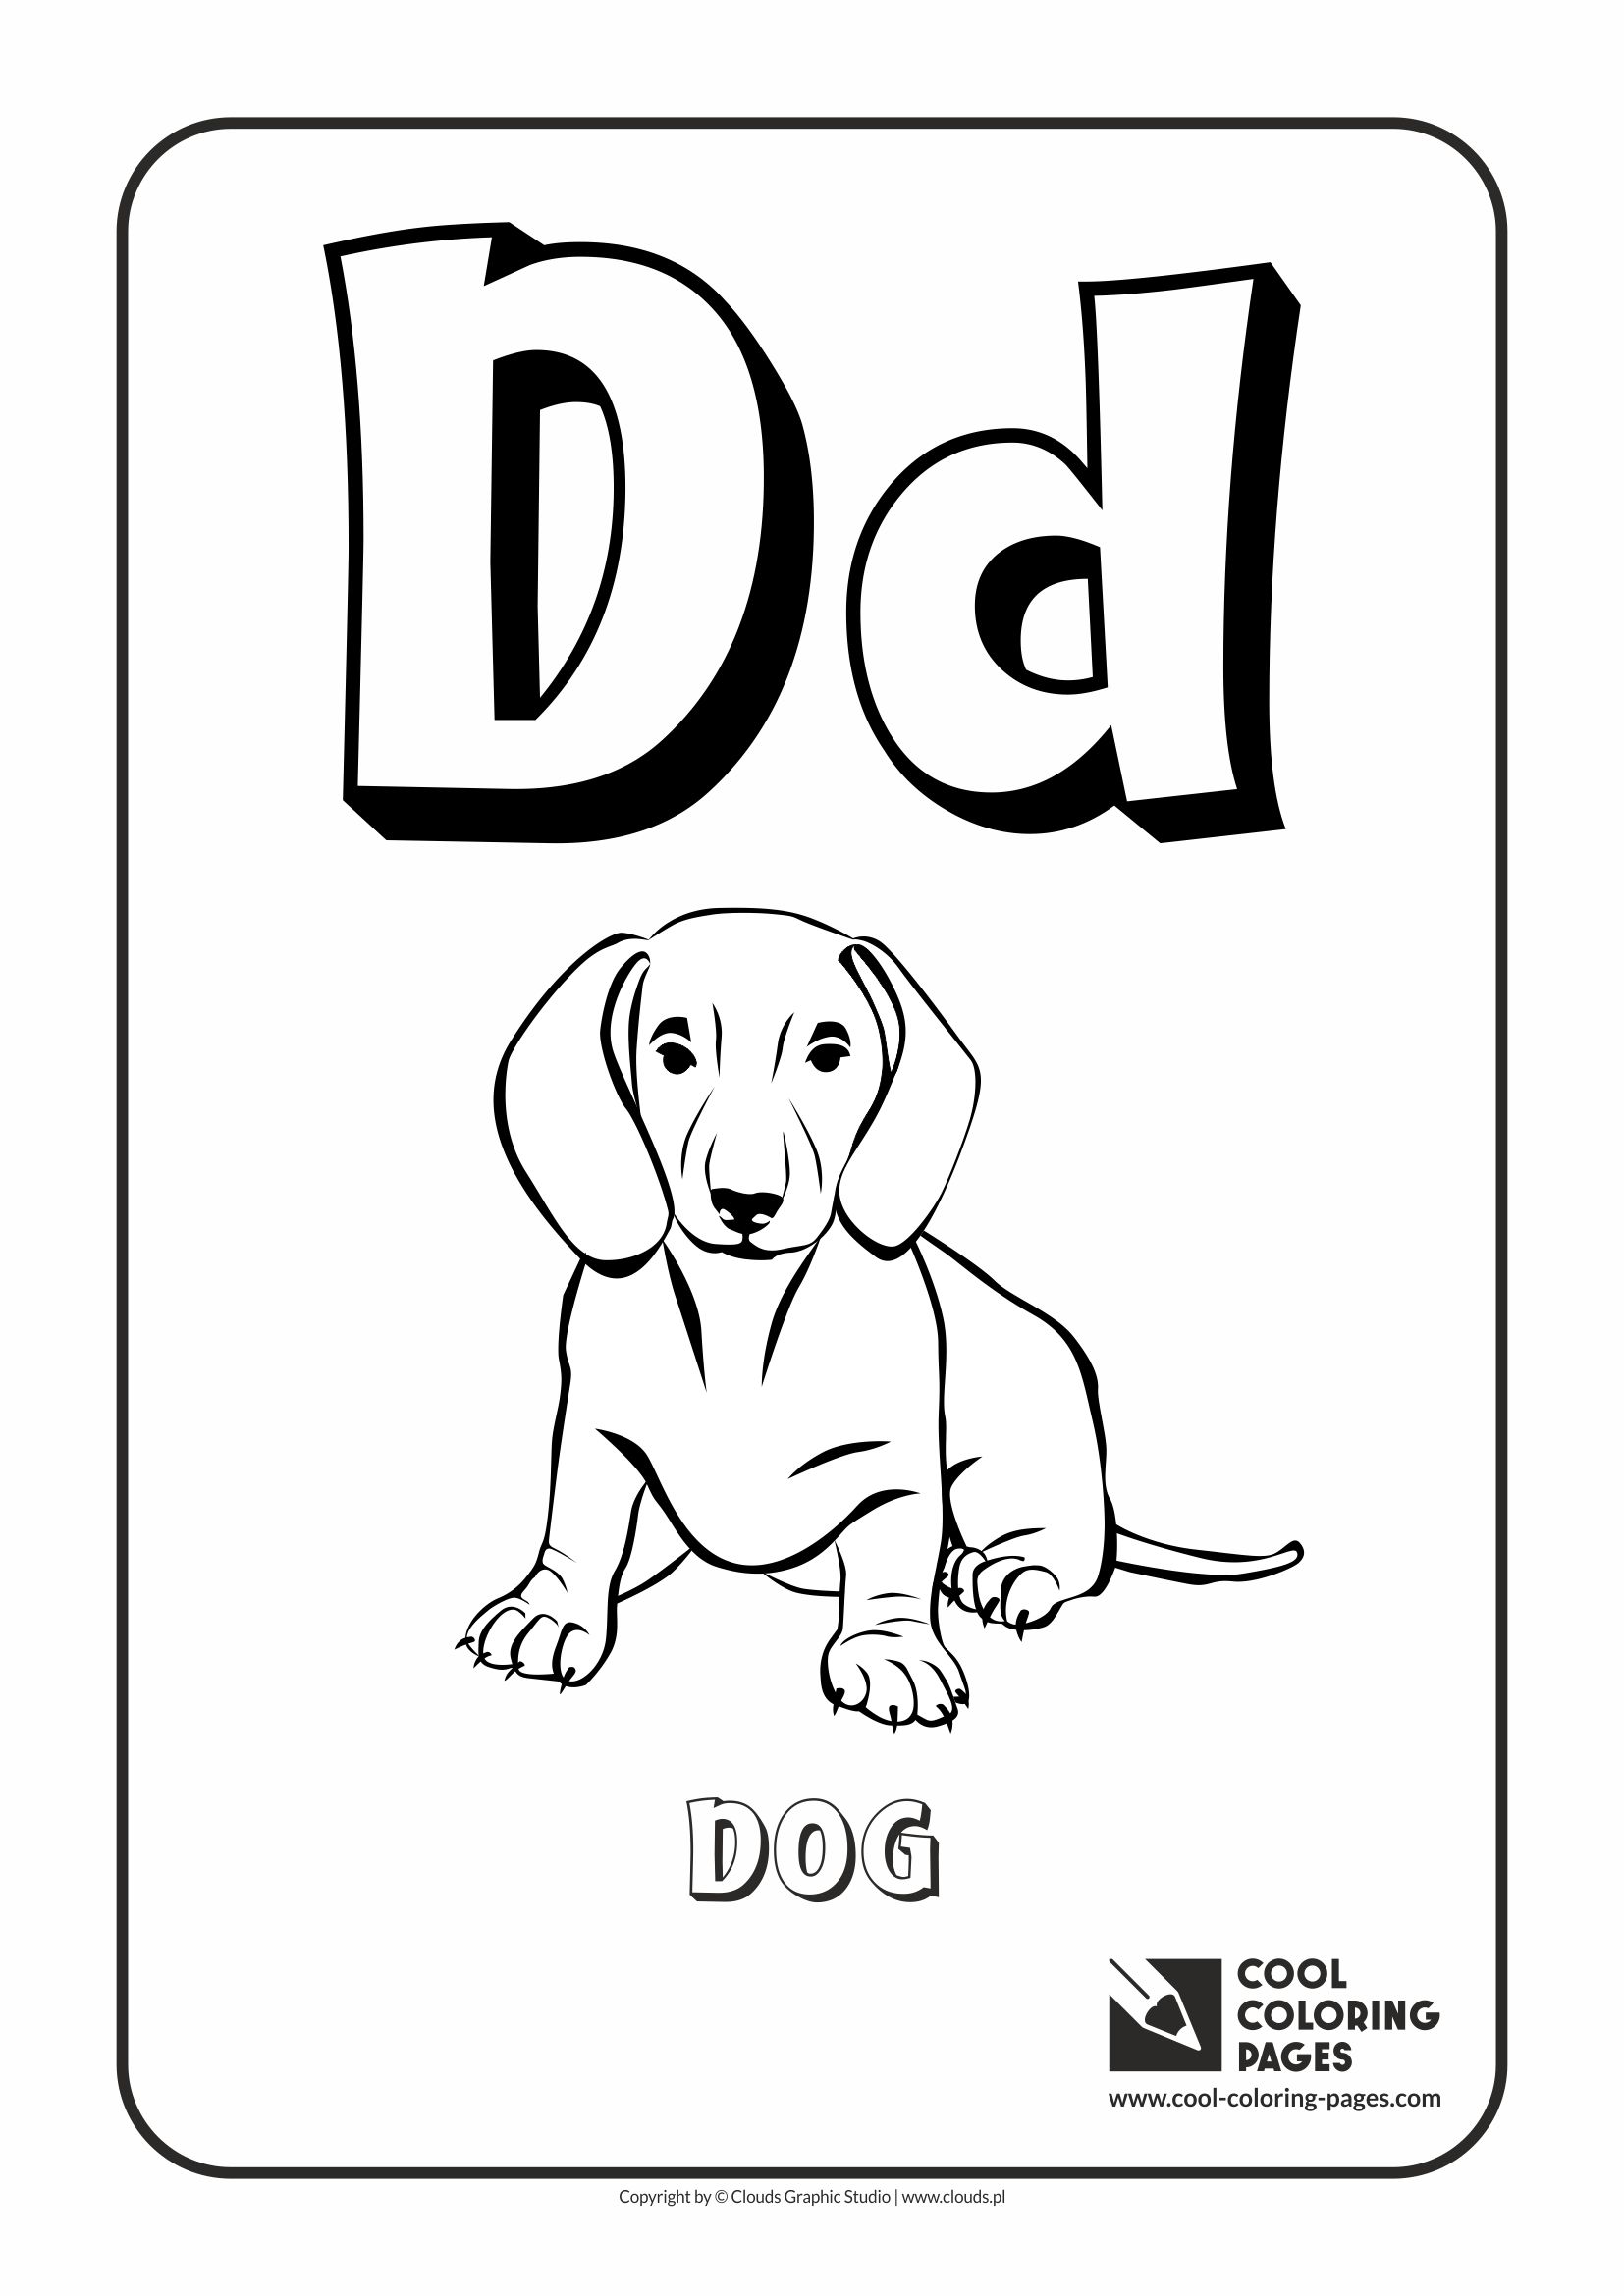 cool-coloring-pages-alphabet-coloring-pages-cool-coloring-pages